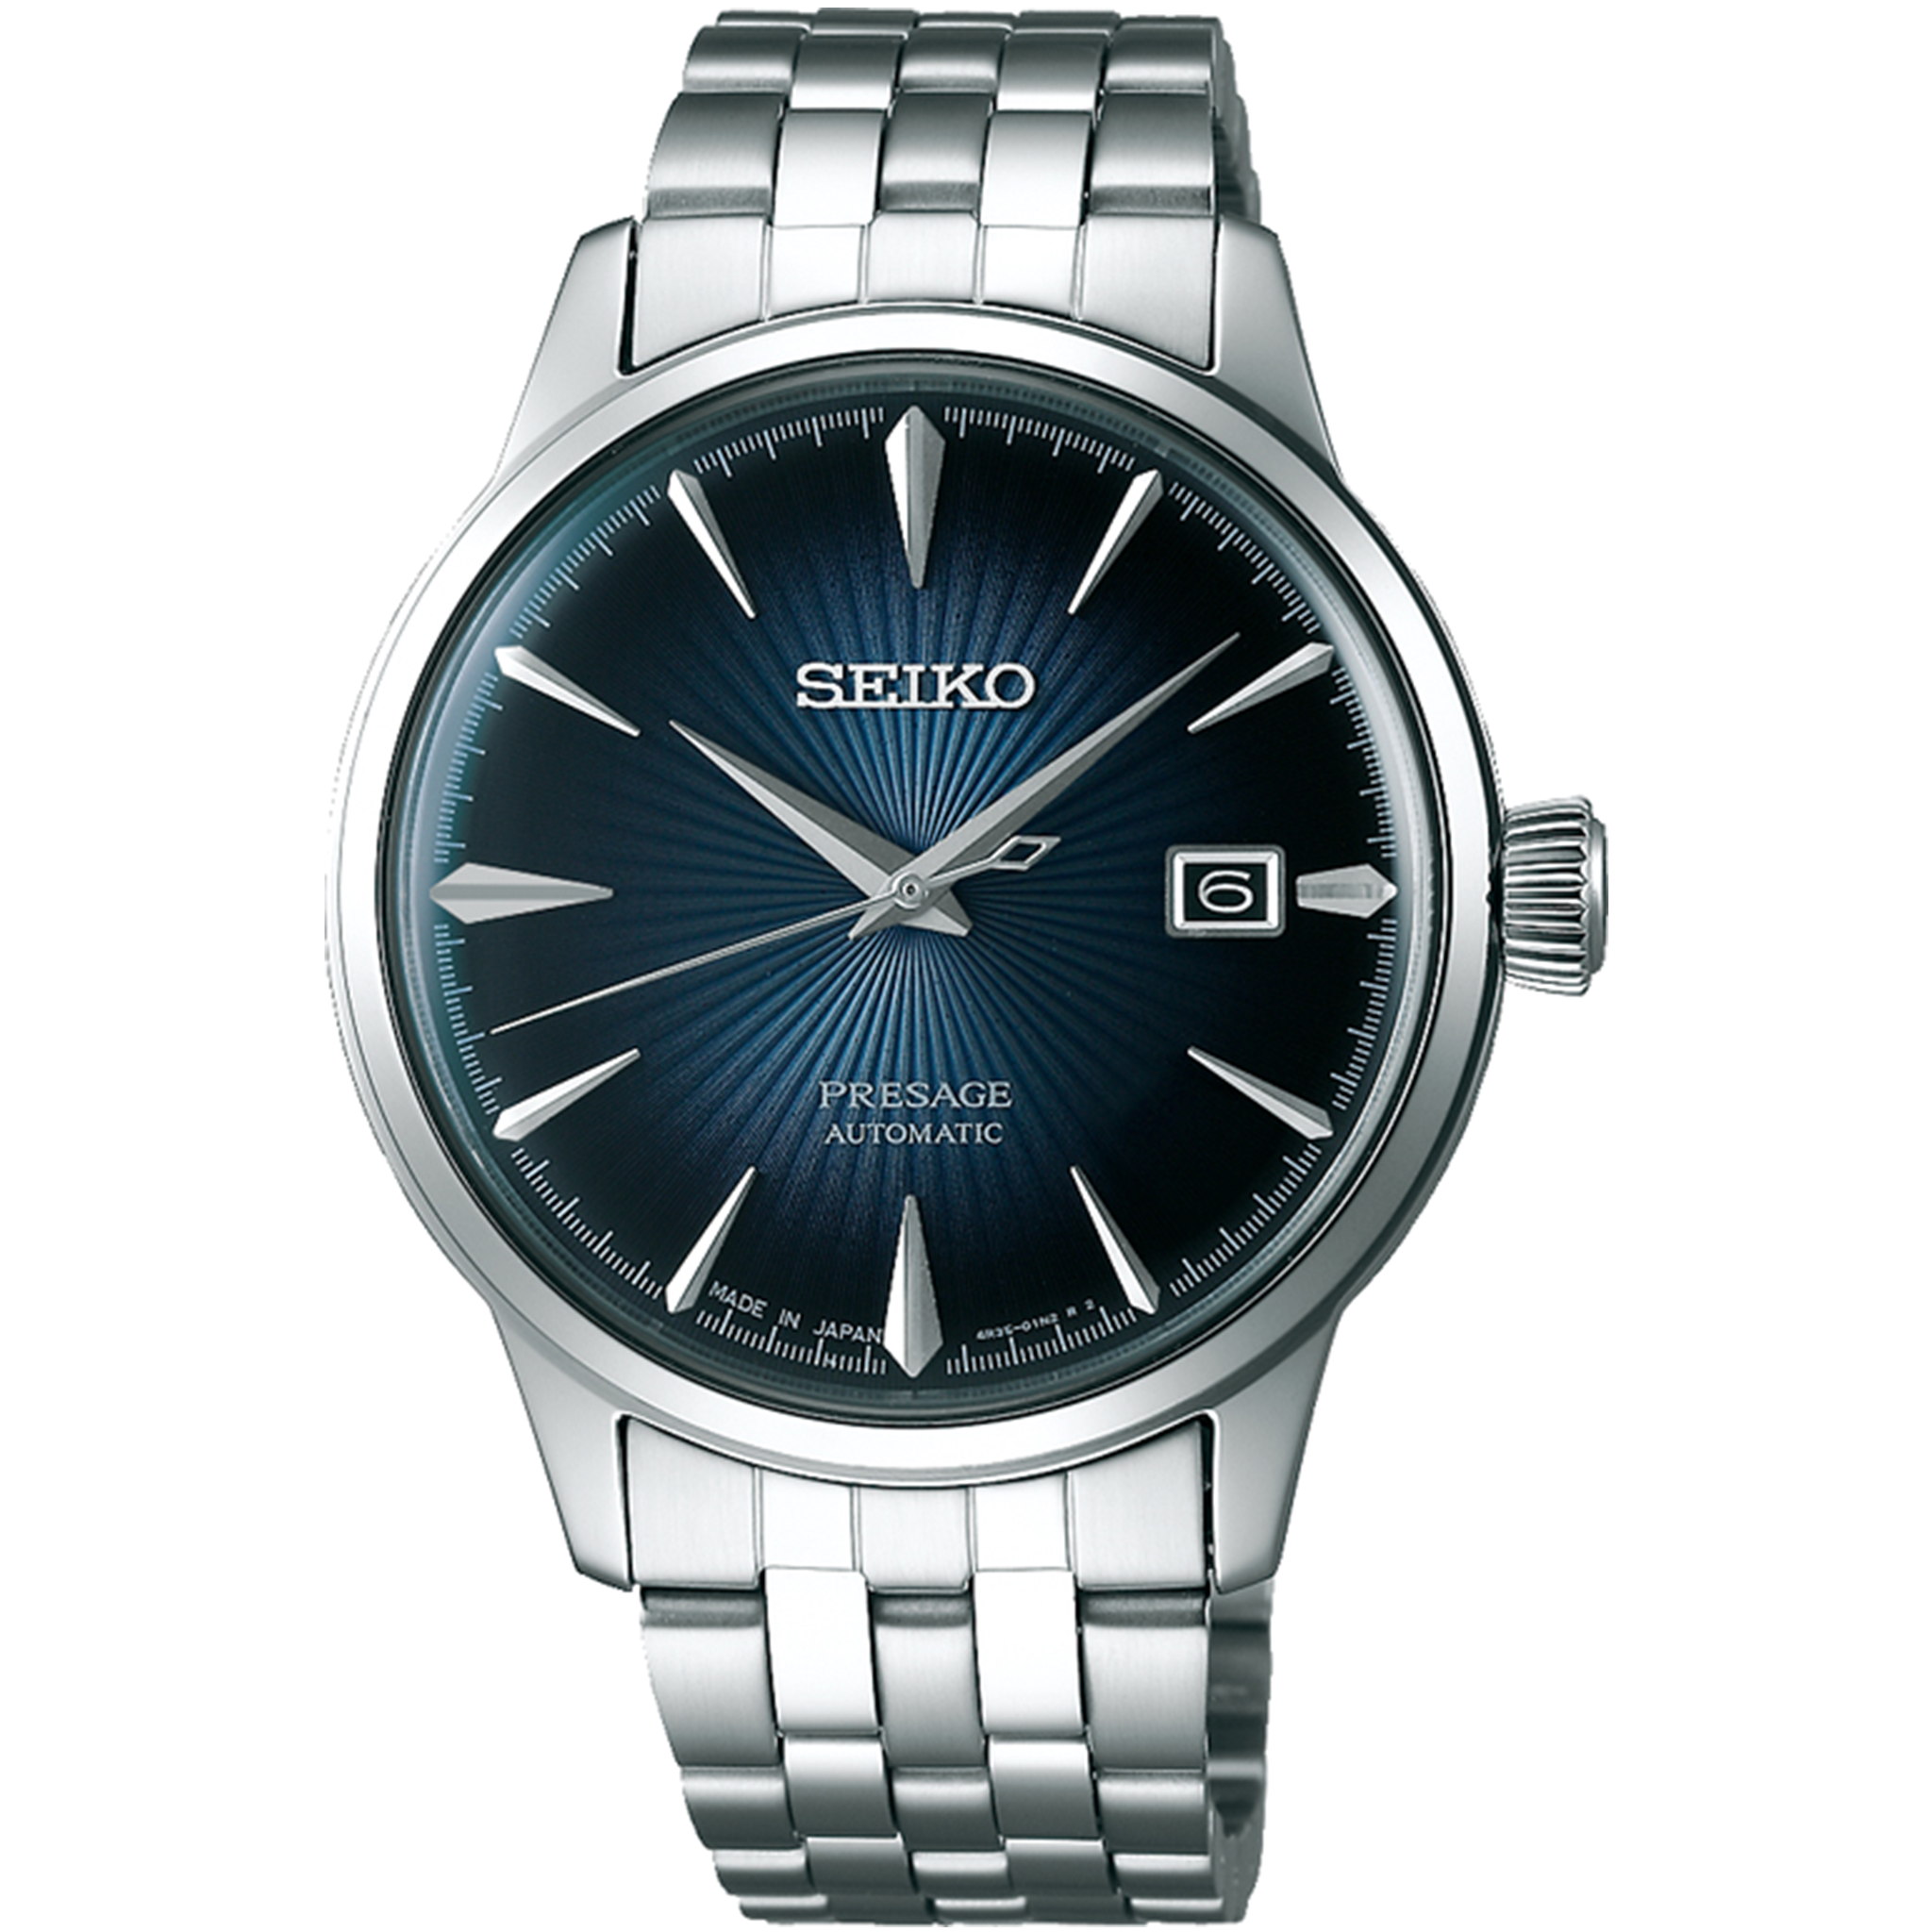 Seiko Presage Automatic - Cocktail Time S/S with Blue Dial SRPB41